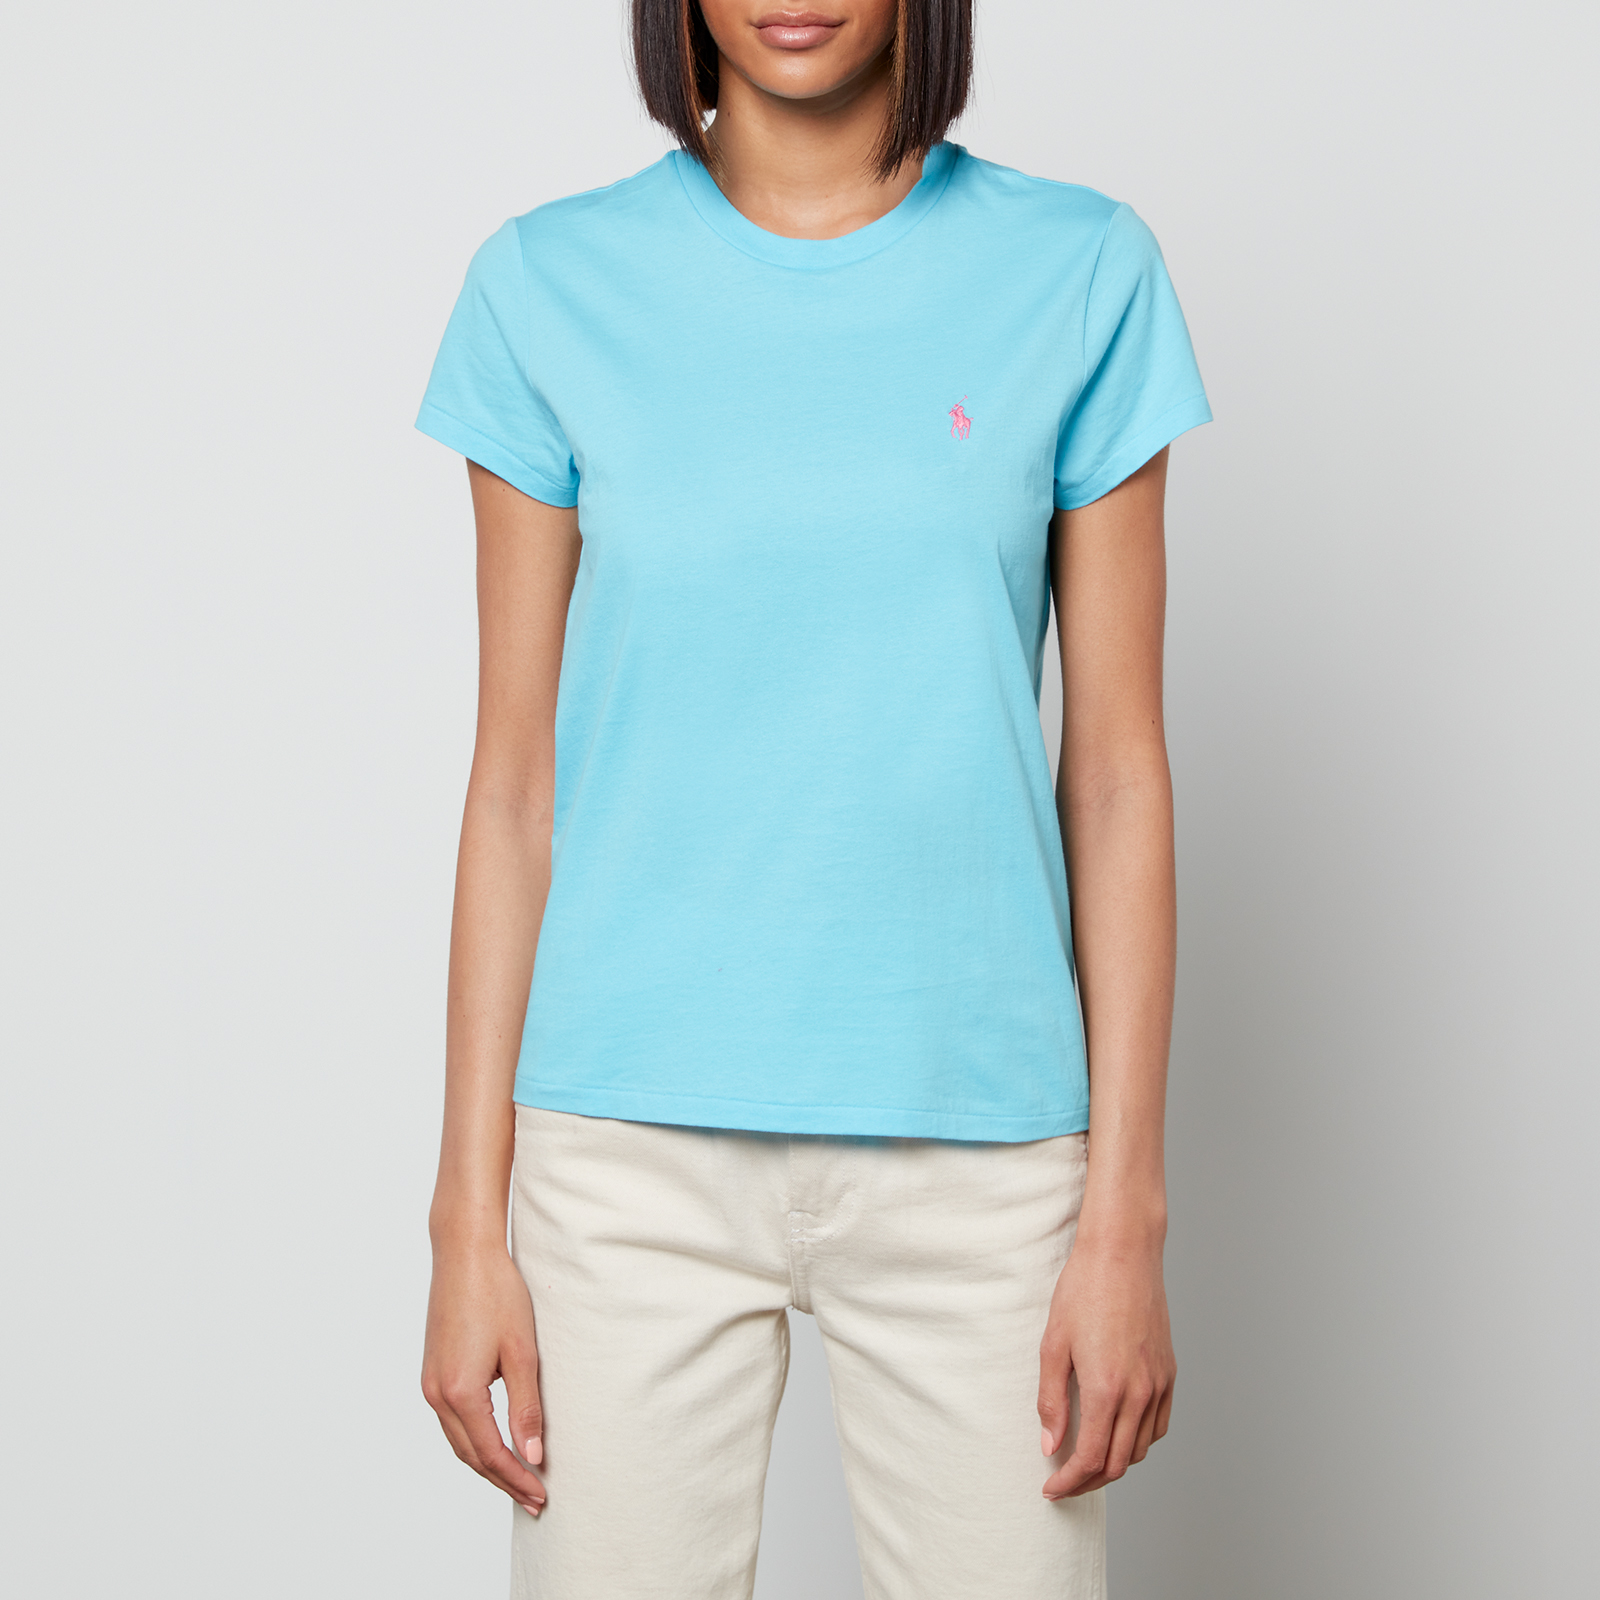 Polo Ralph Lauren Women's Small Pp T-Shirt - French Turquoise